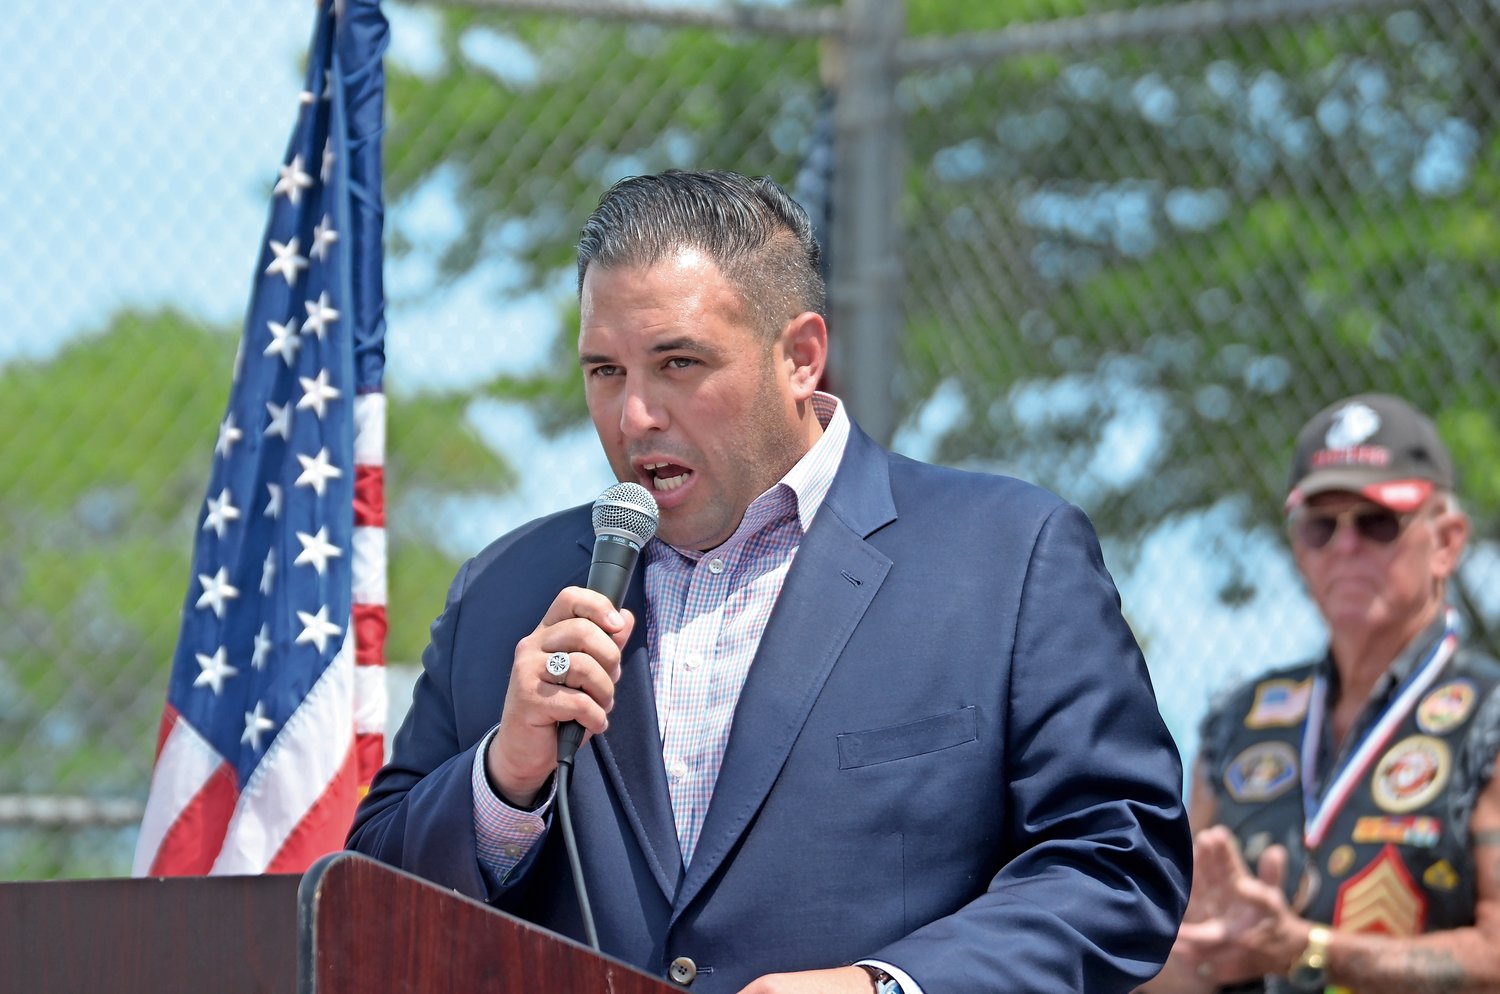 Town of Hempstead Councilman Anthony D’Esposito is ready to take on whomever Democrats offer after their Aug. 23 primary, already locking up the GOP nomination for the 4th Congressional District seat. Potential challengers include former Town of Hempstead Supervisor Laura Gillen and Malverne mayor Keith Corbett, who have combined to raise nearly $1 million.